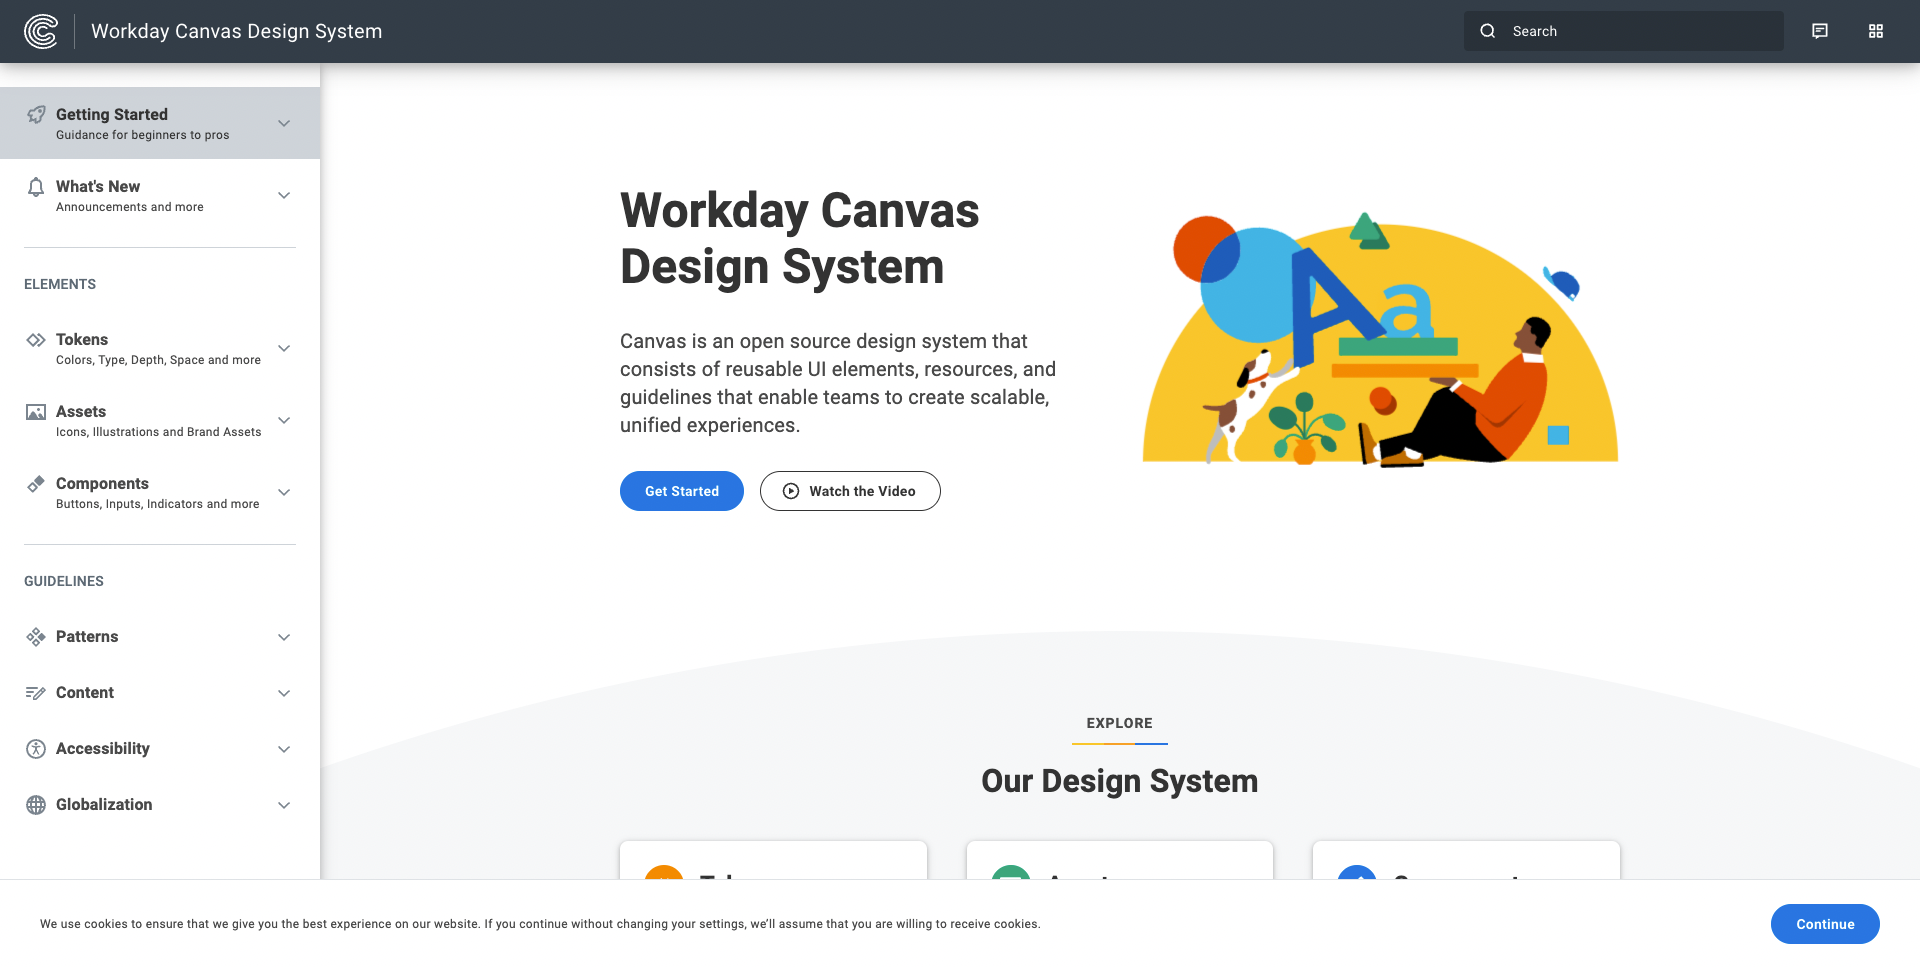 https://canvas.workday.com/